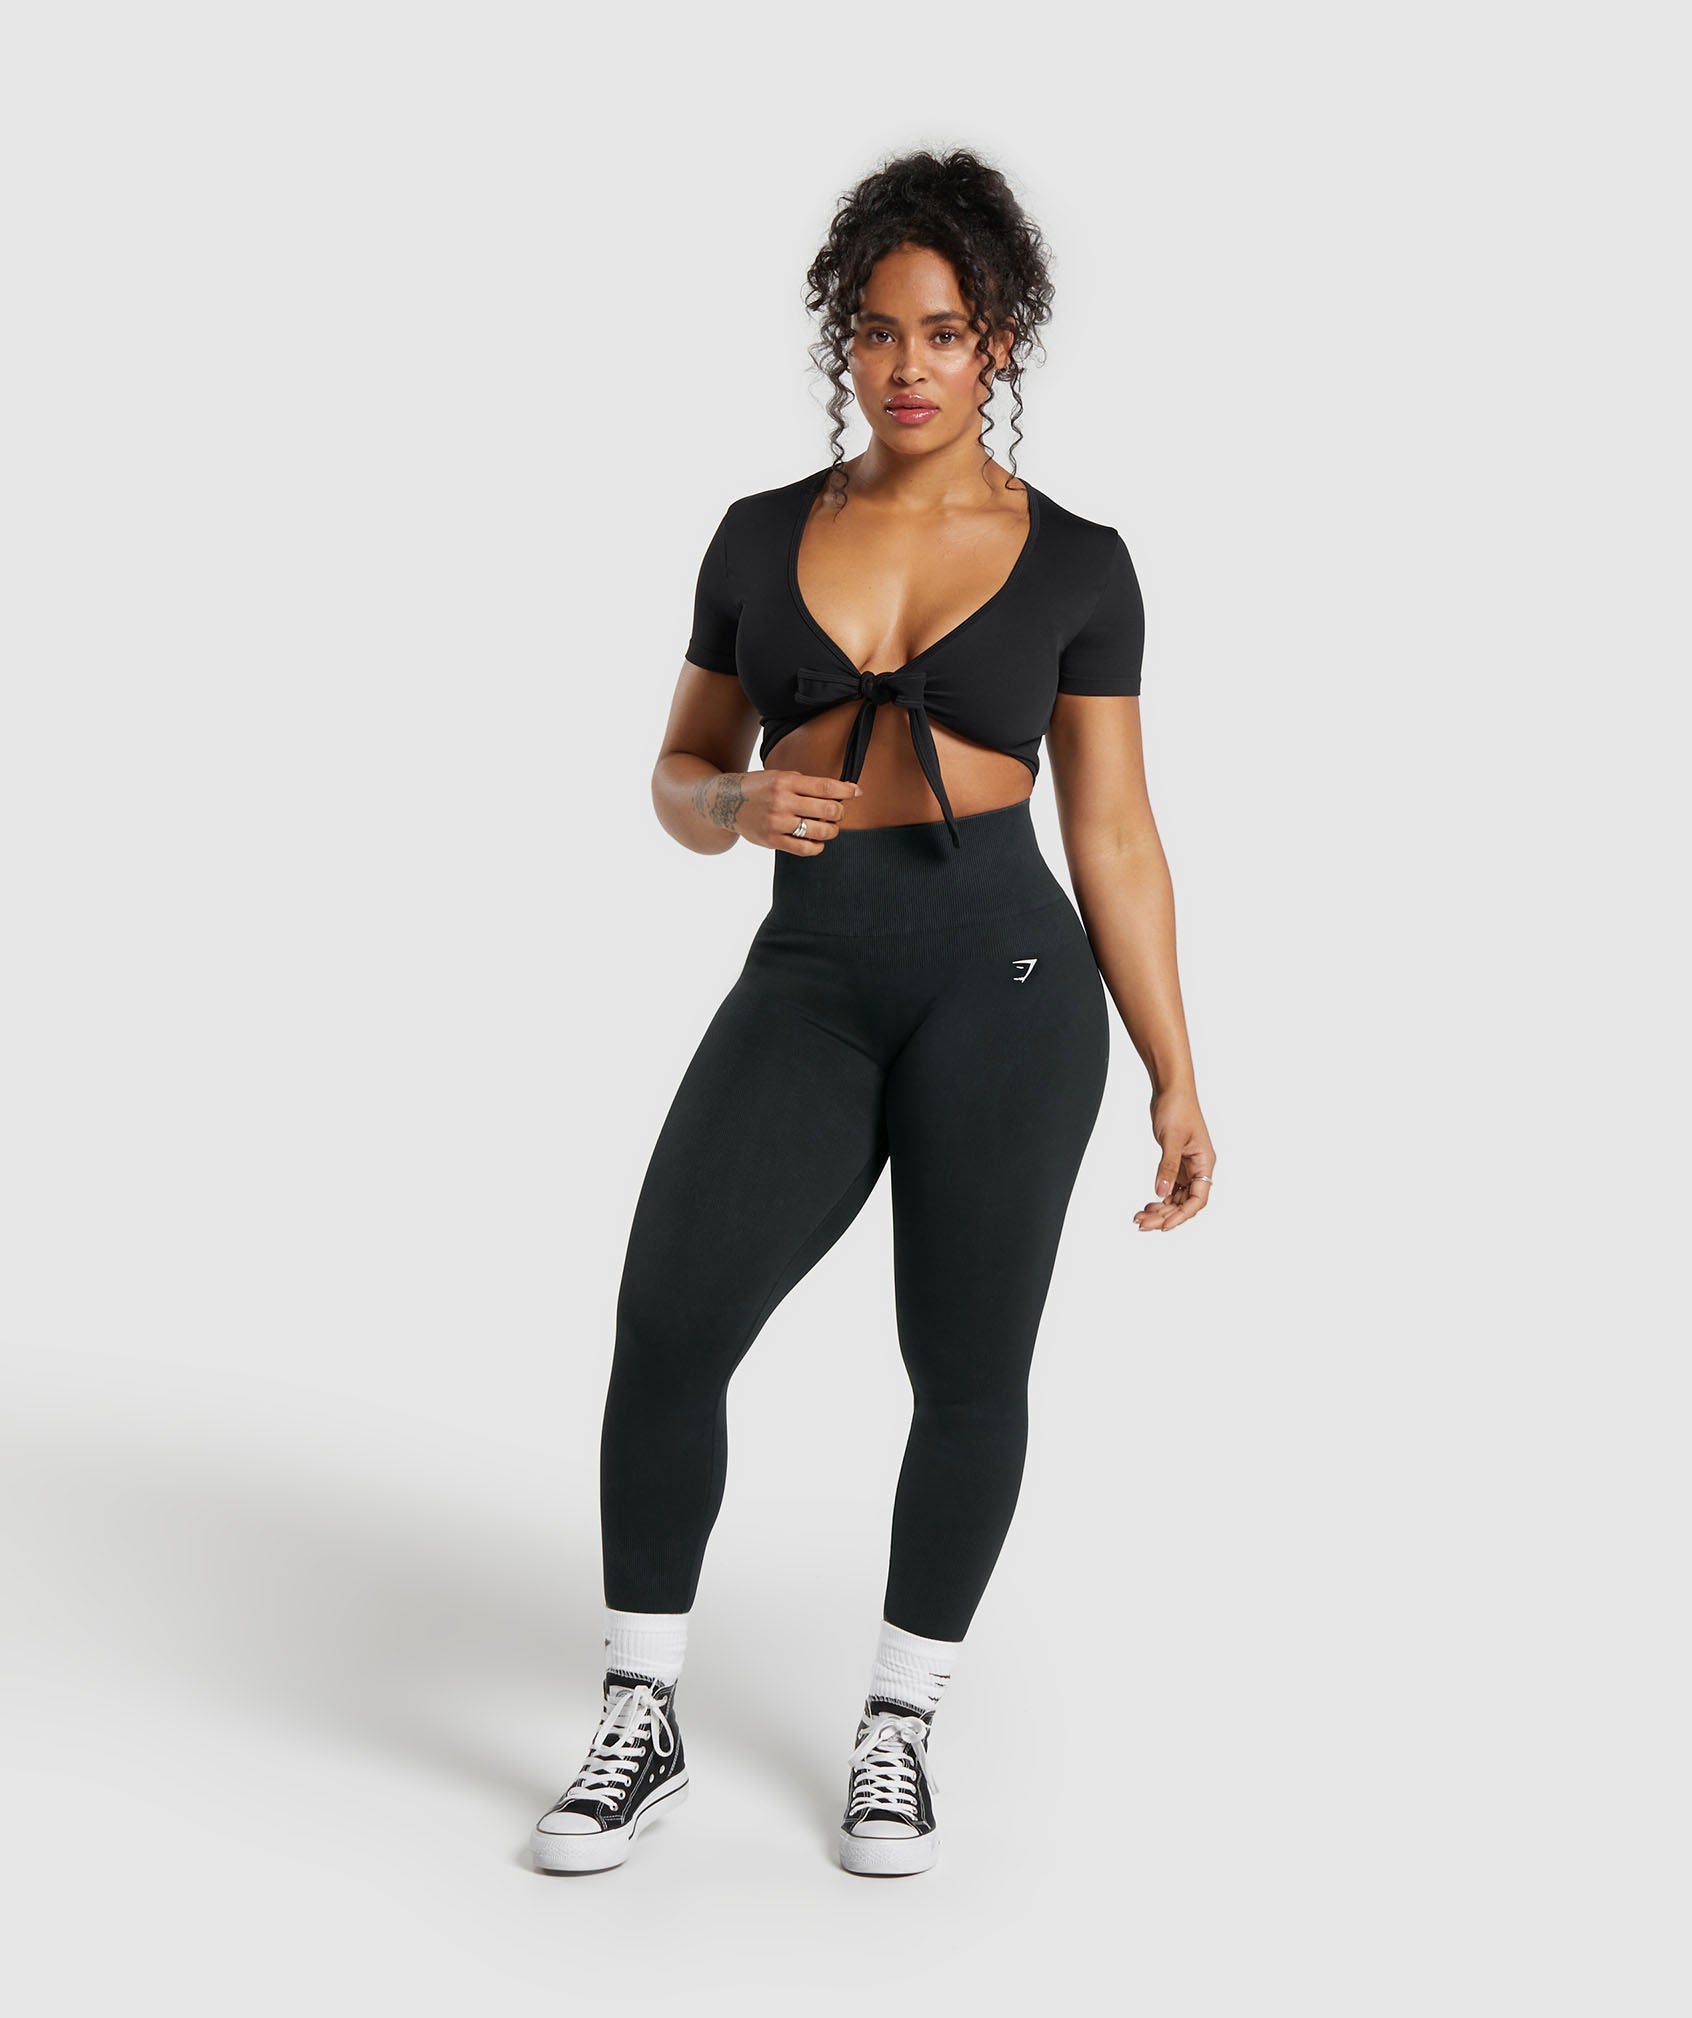 Gains Seamless Fitted Crop Top in Black - view 4